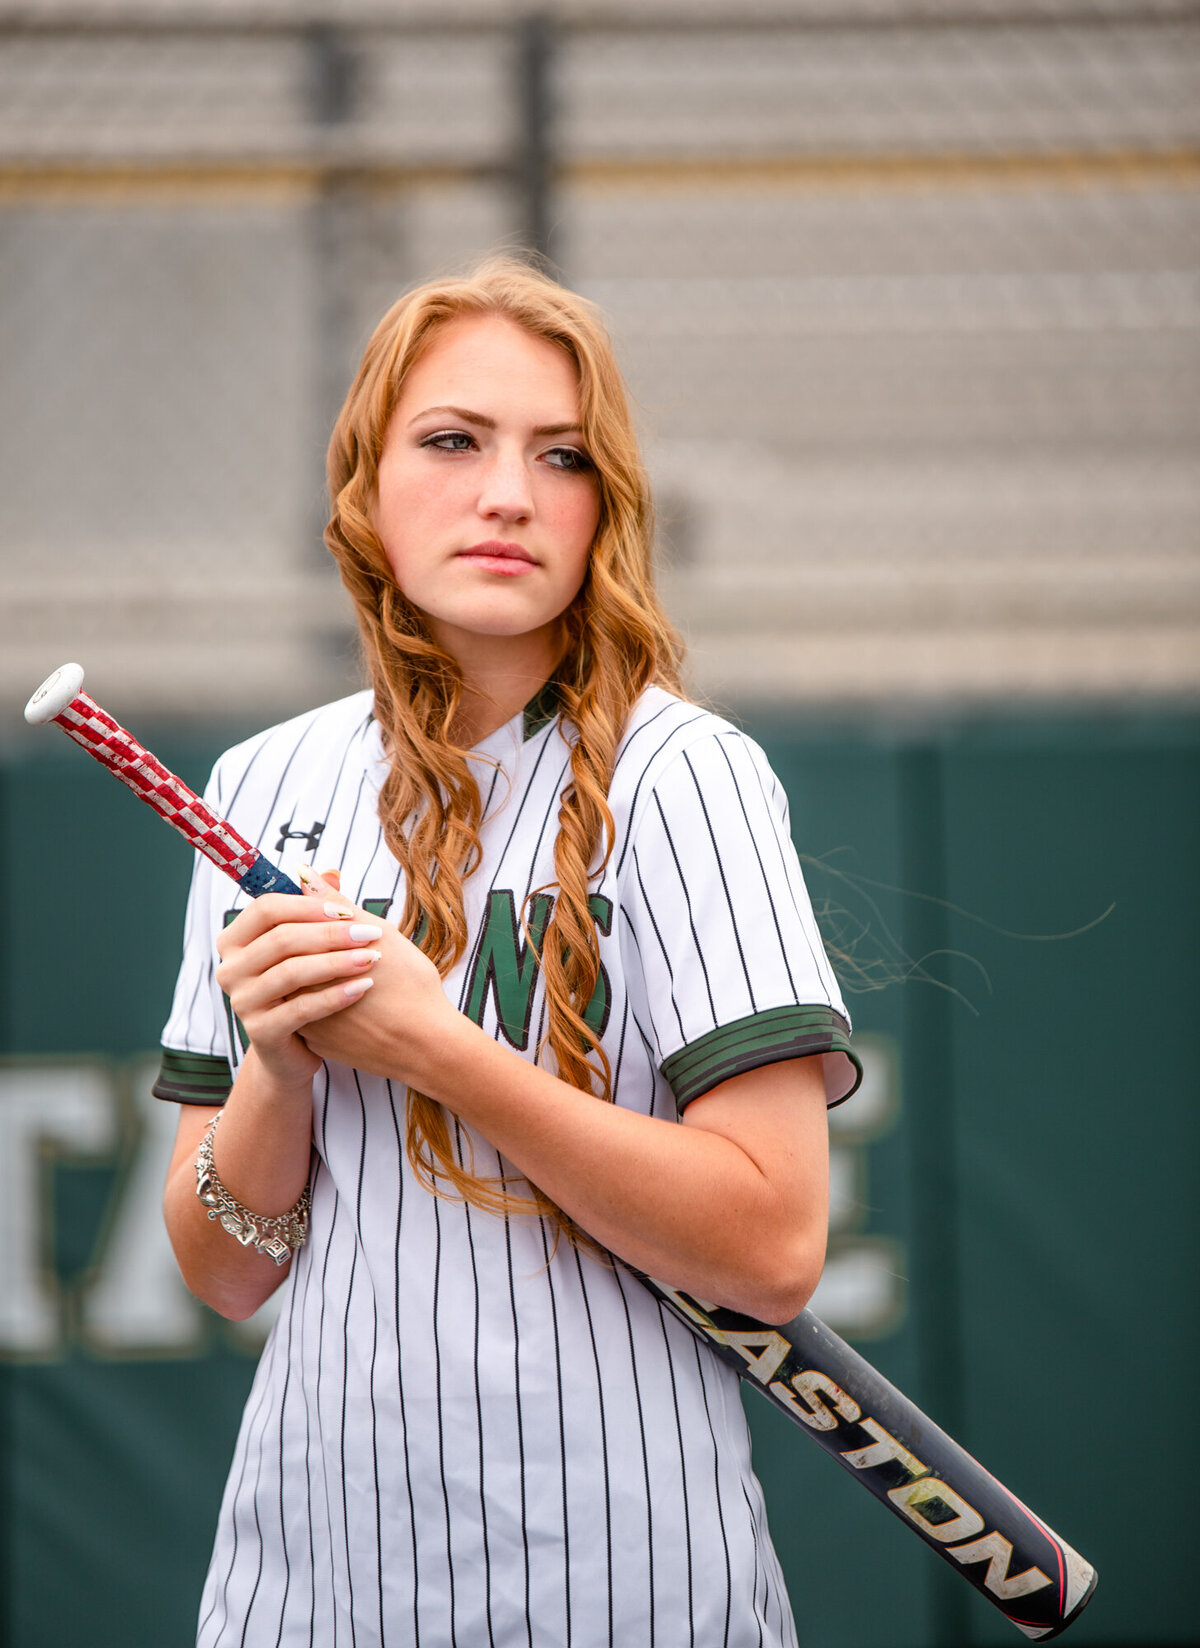 A Santa Fe graduate stands near home plate holding her bat and looking off to her left.